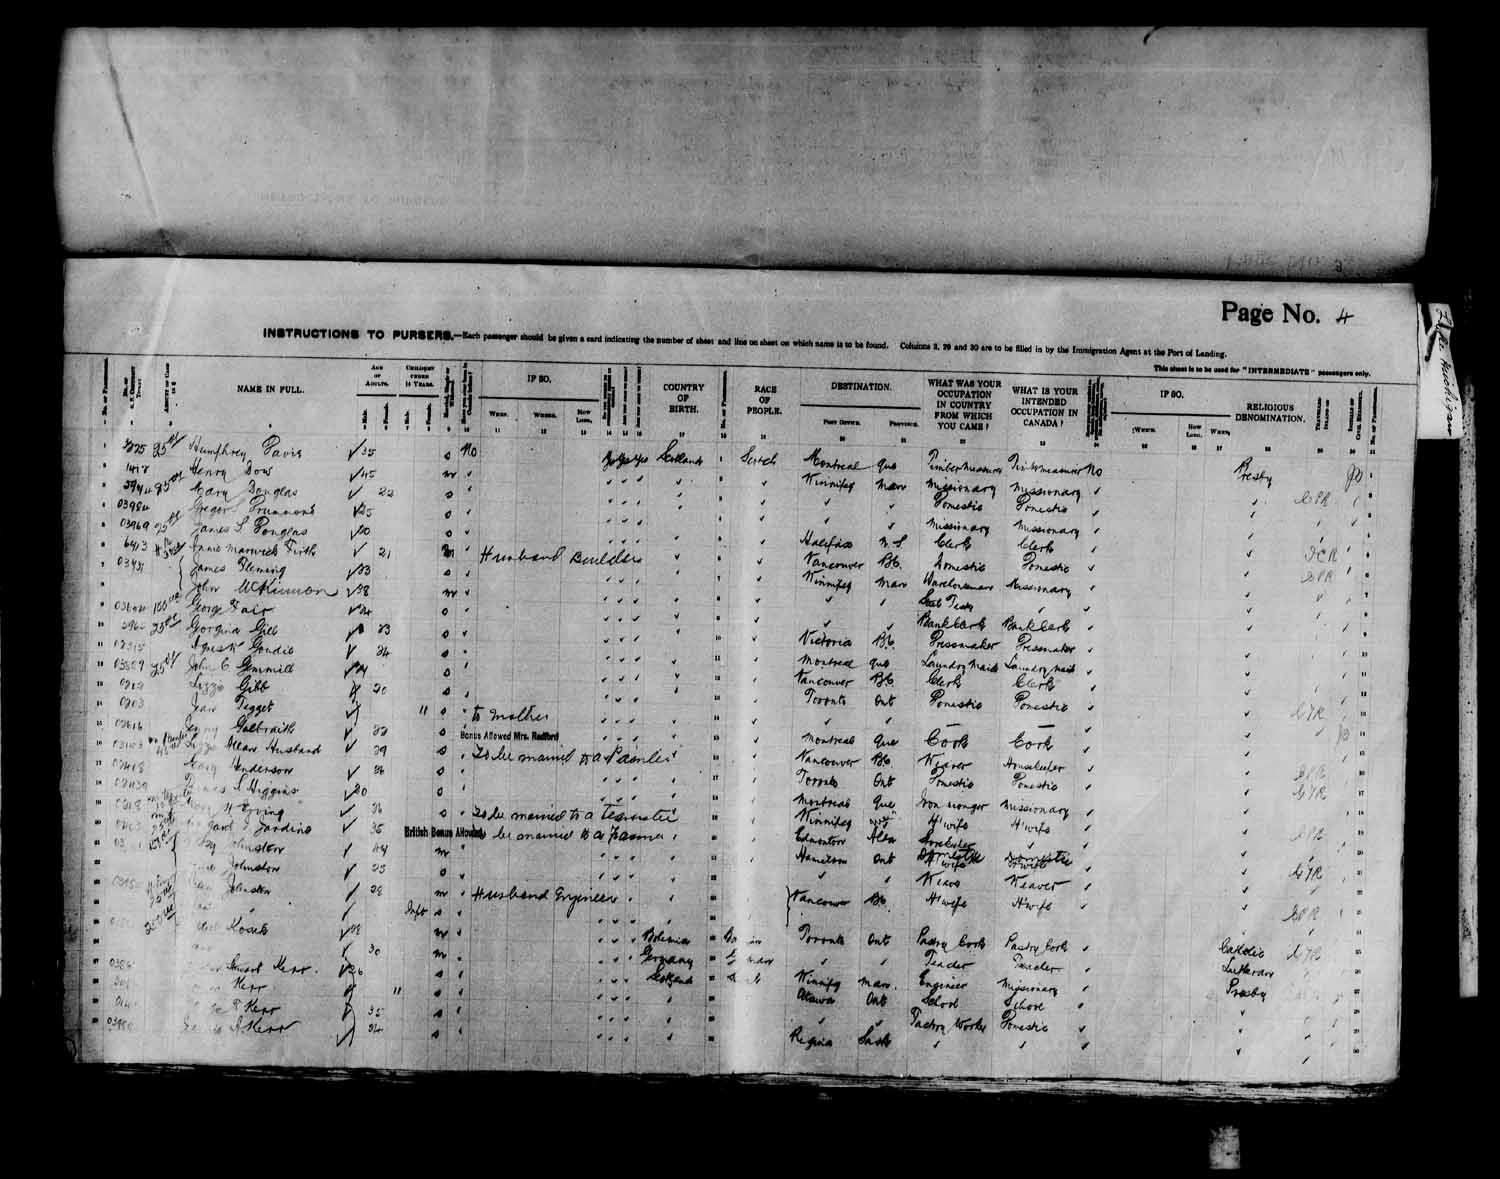 Digitized page of Passenger Lists for Image No.: e003566515